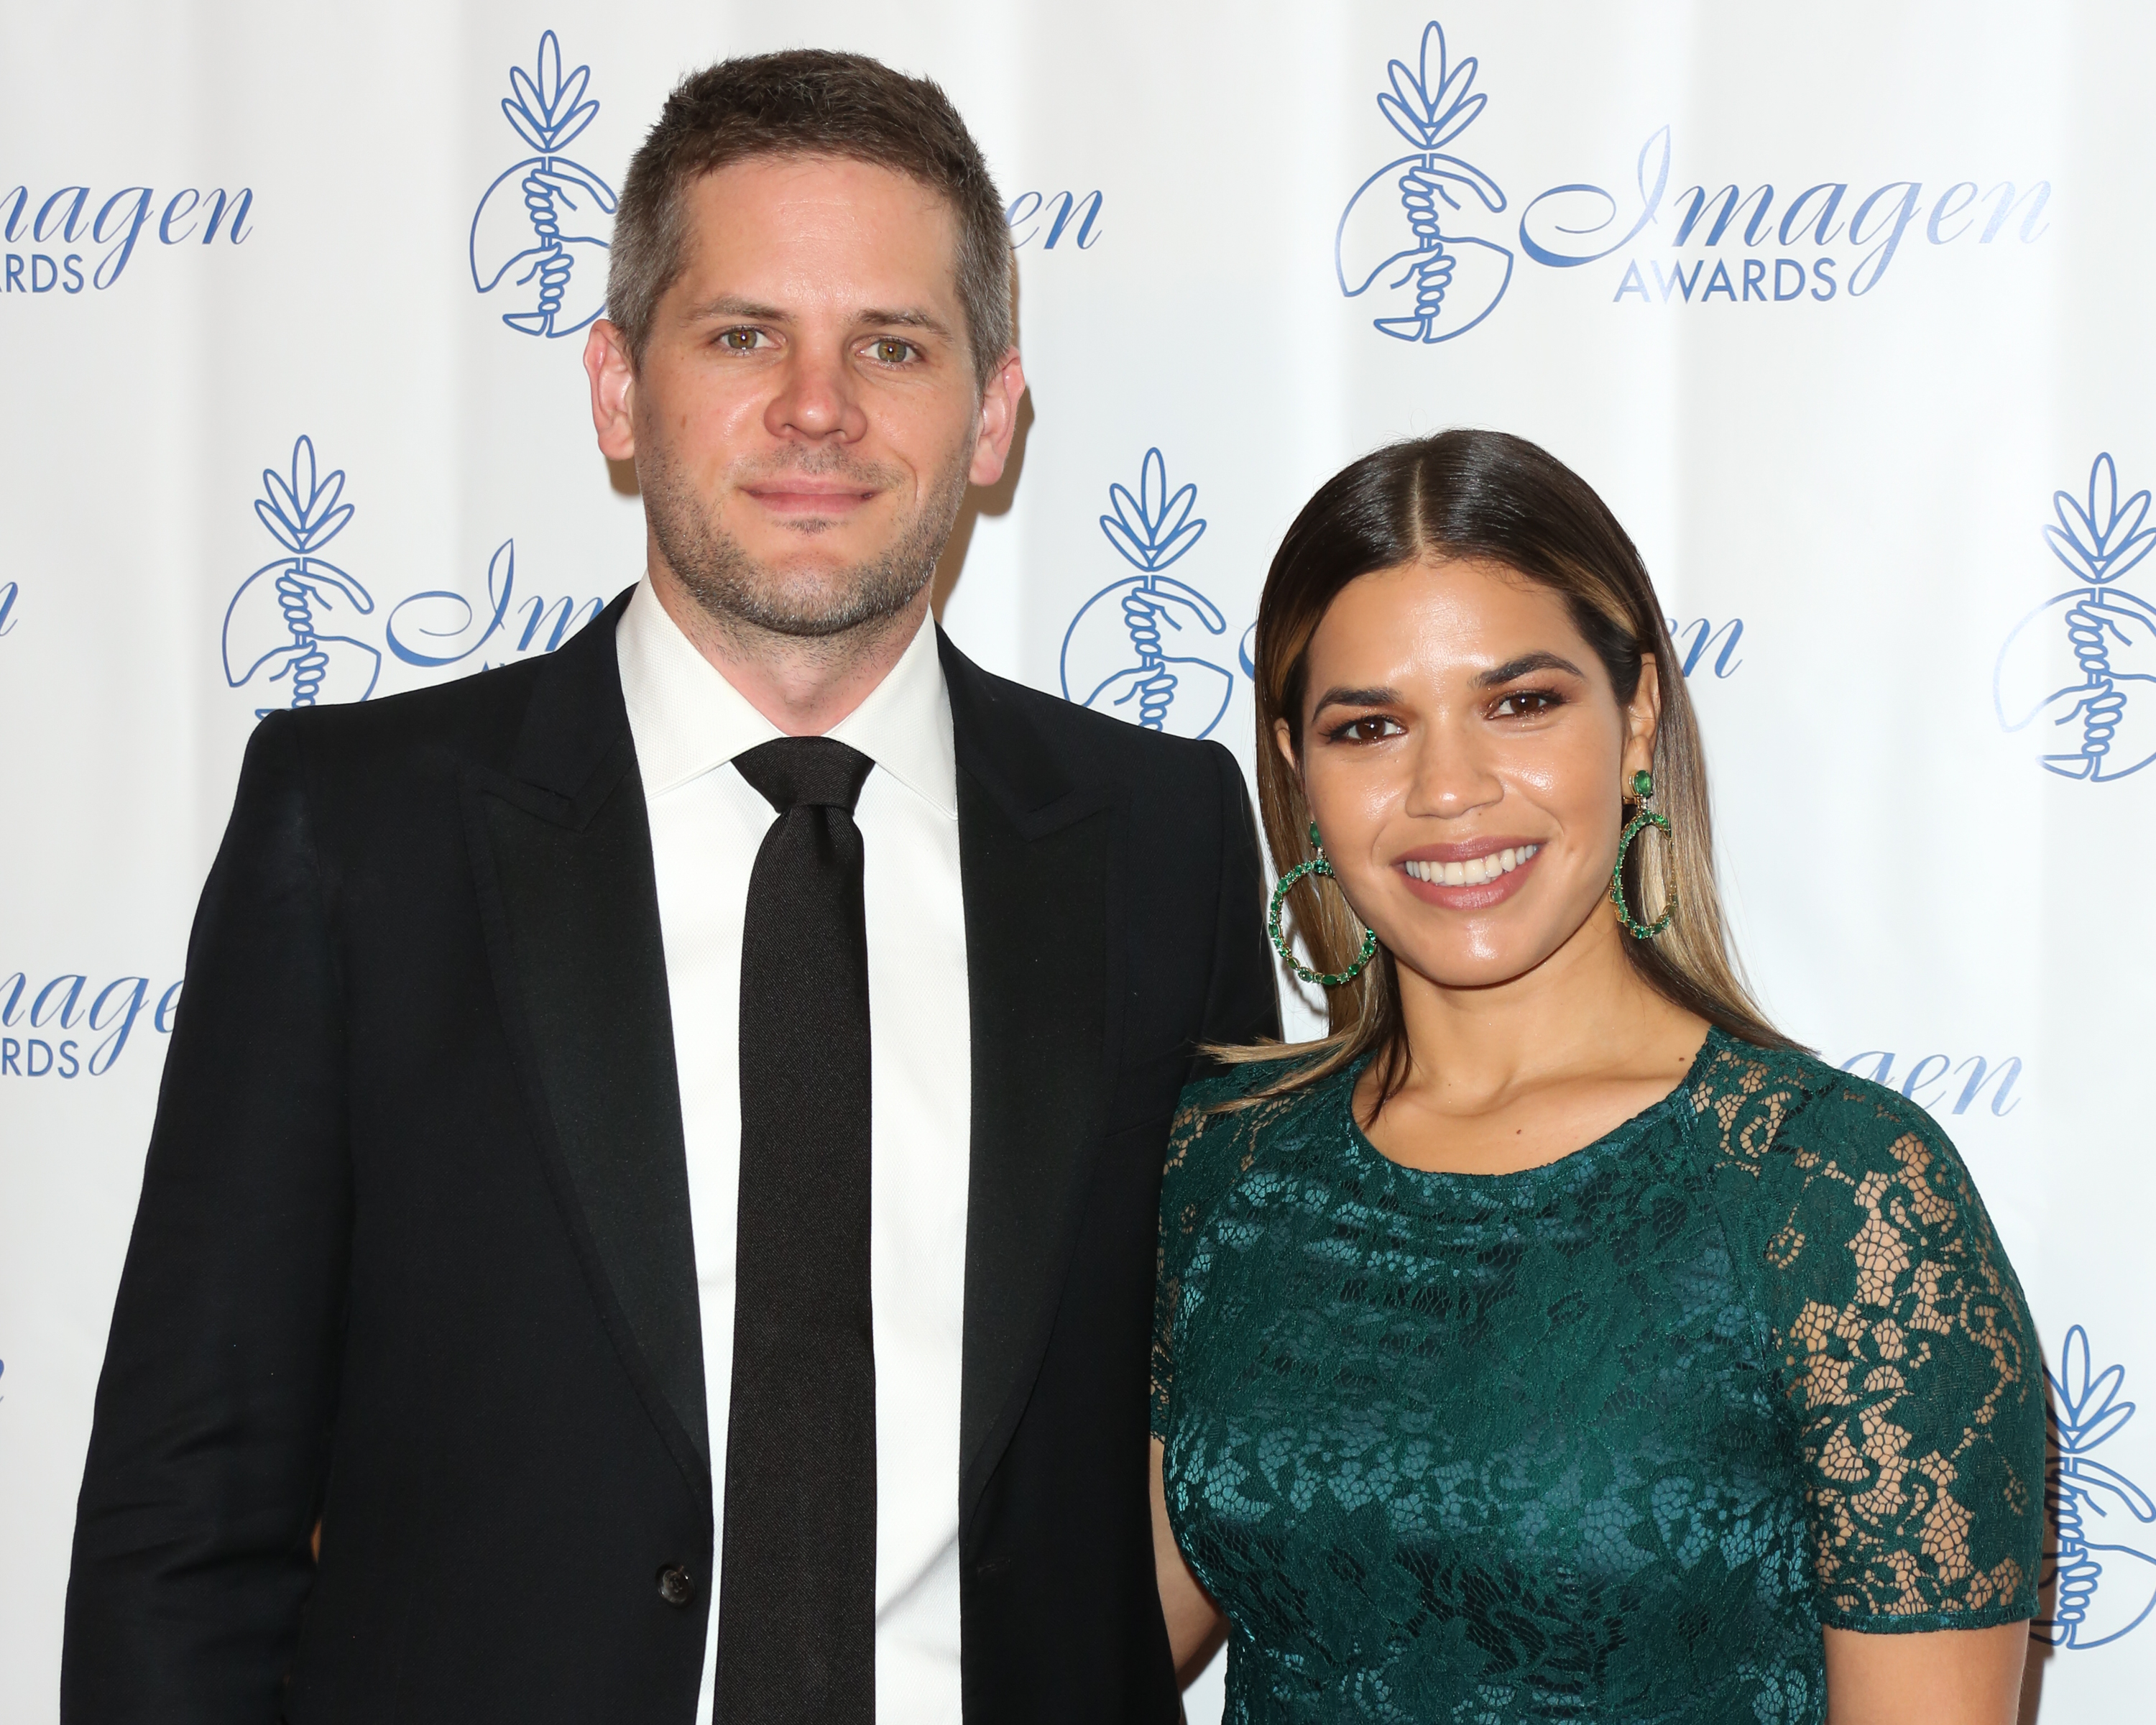 America Ferrera and Ryan Piers Williams at the 32nd Annual Imagen Awards in Beverly Hills, Calif. on Aug. 18, 2017. (Paul Archuleta—FilmMagic/Getty Images)